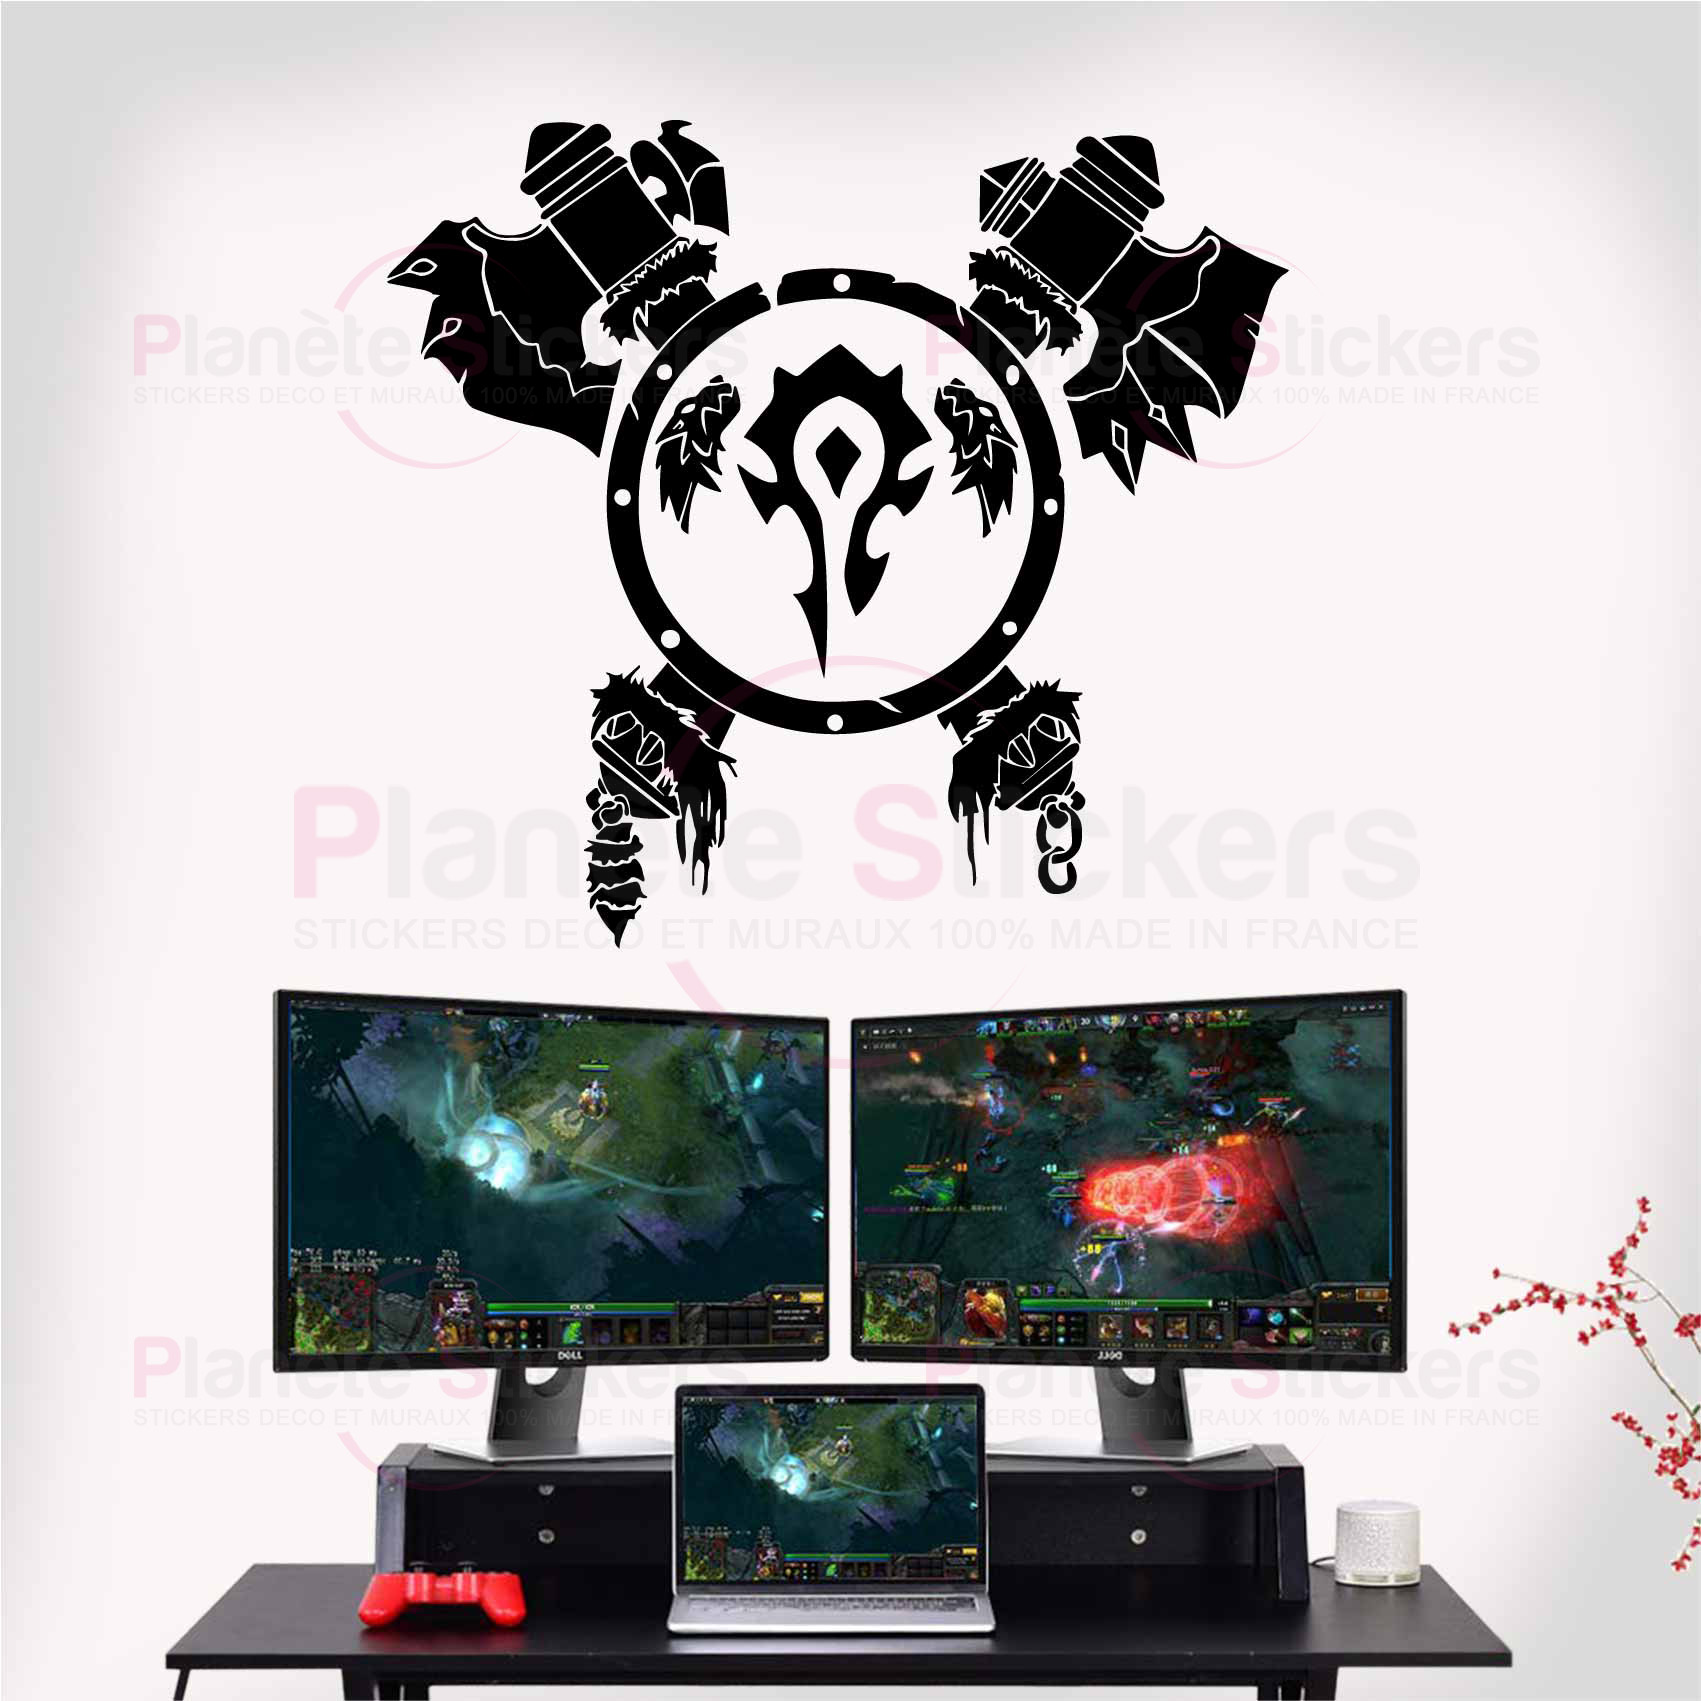 stickers-bouclier-horde-wow-ref26wow-stickers-muraux-world-of-warcraft-autocollant-mural-jeux-video-sticker-gamer-deco-gaming-salon-chambre